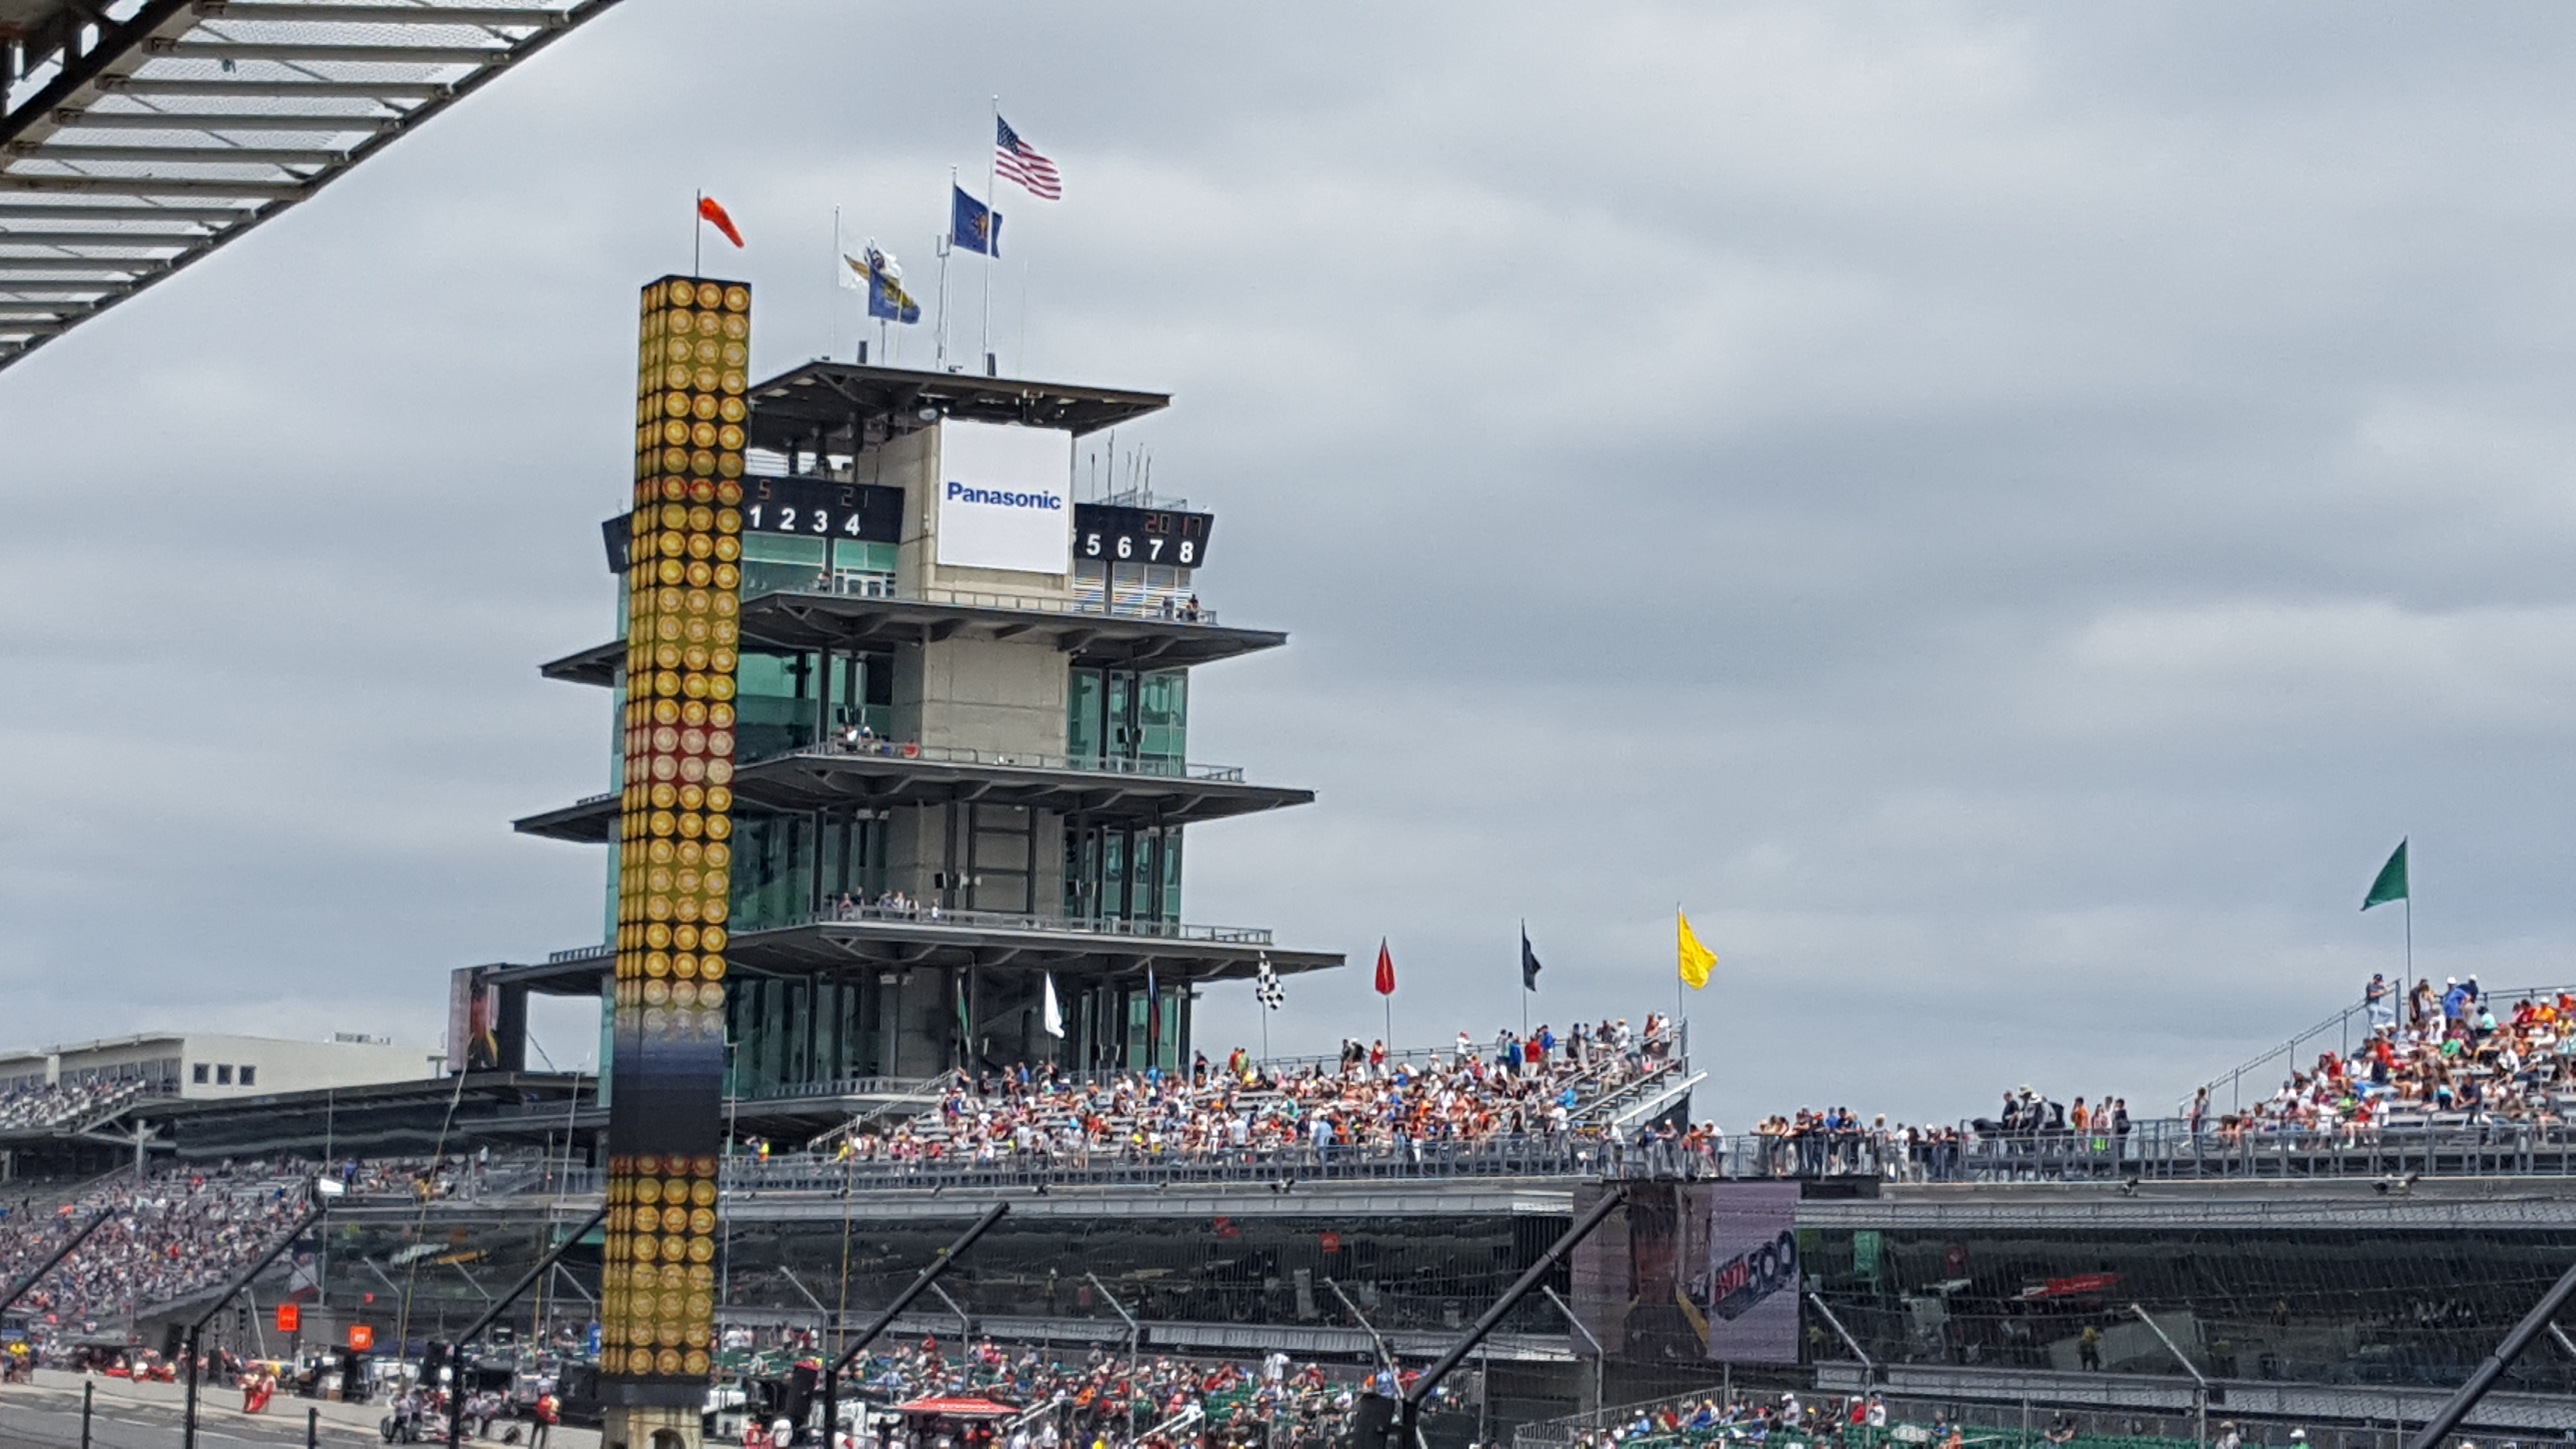 Thumbnail for the post titled: Public Safety Agencies Work Collaboratively to Provide Safe Environment  for the 101st Running of the Indianapolis 500 Race